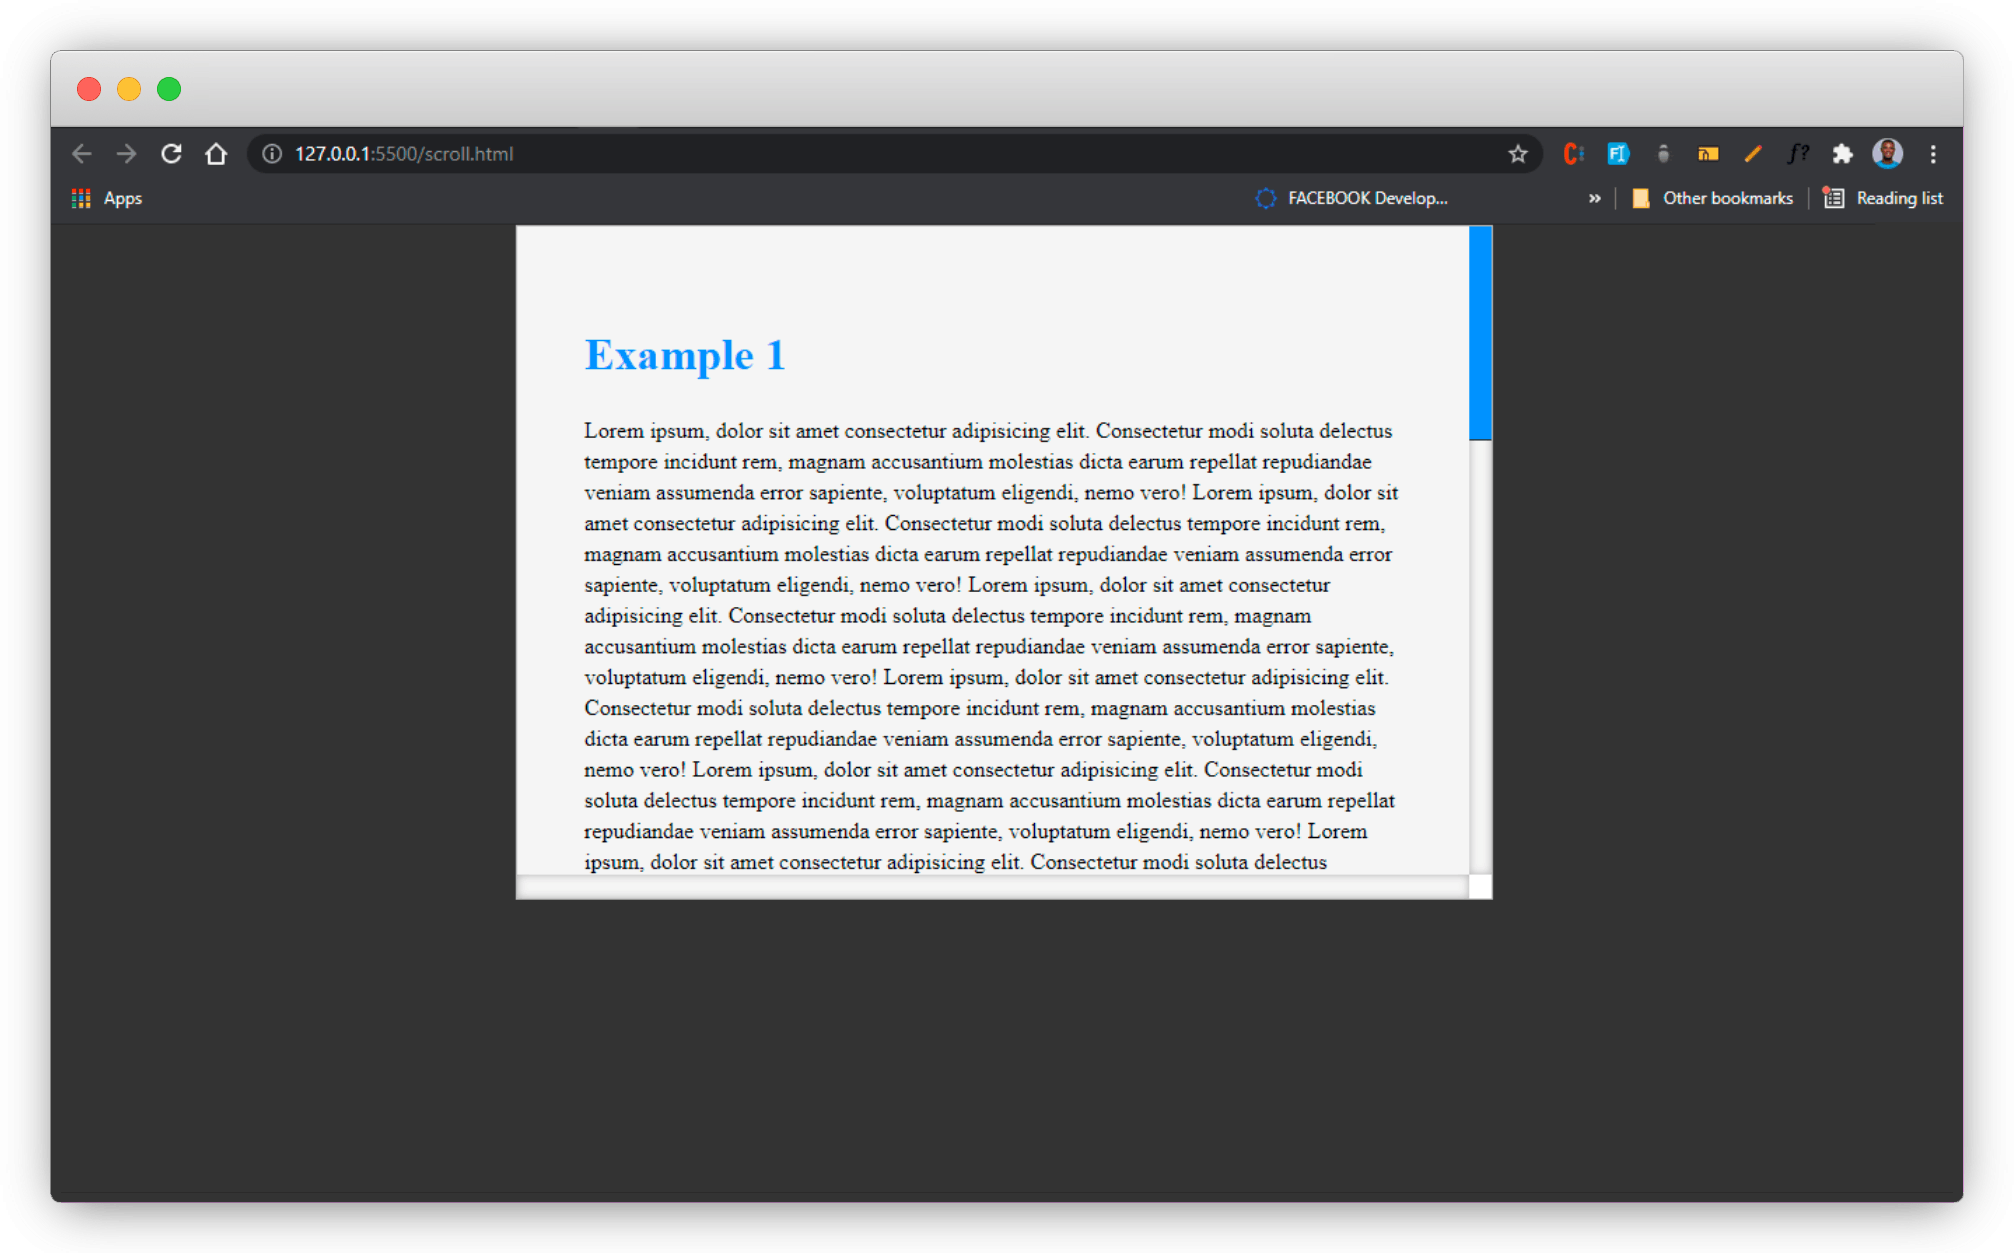 example 1 output on browser